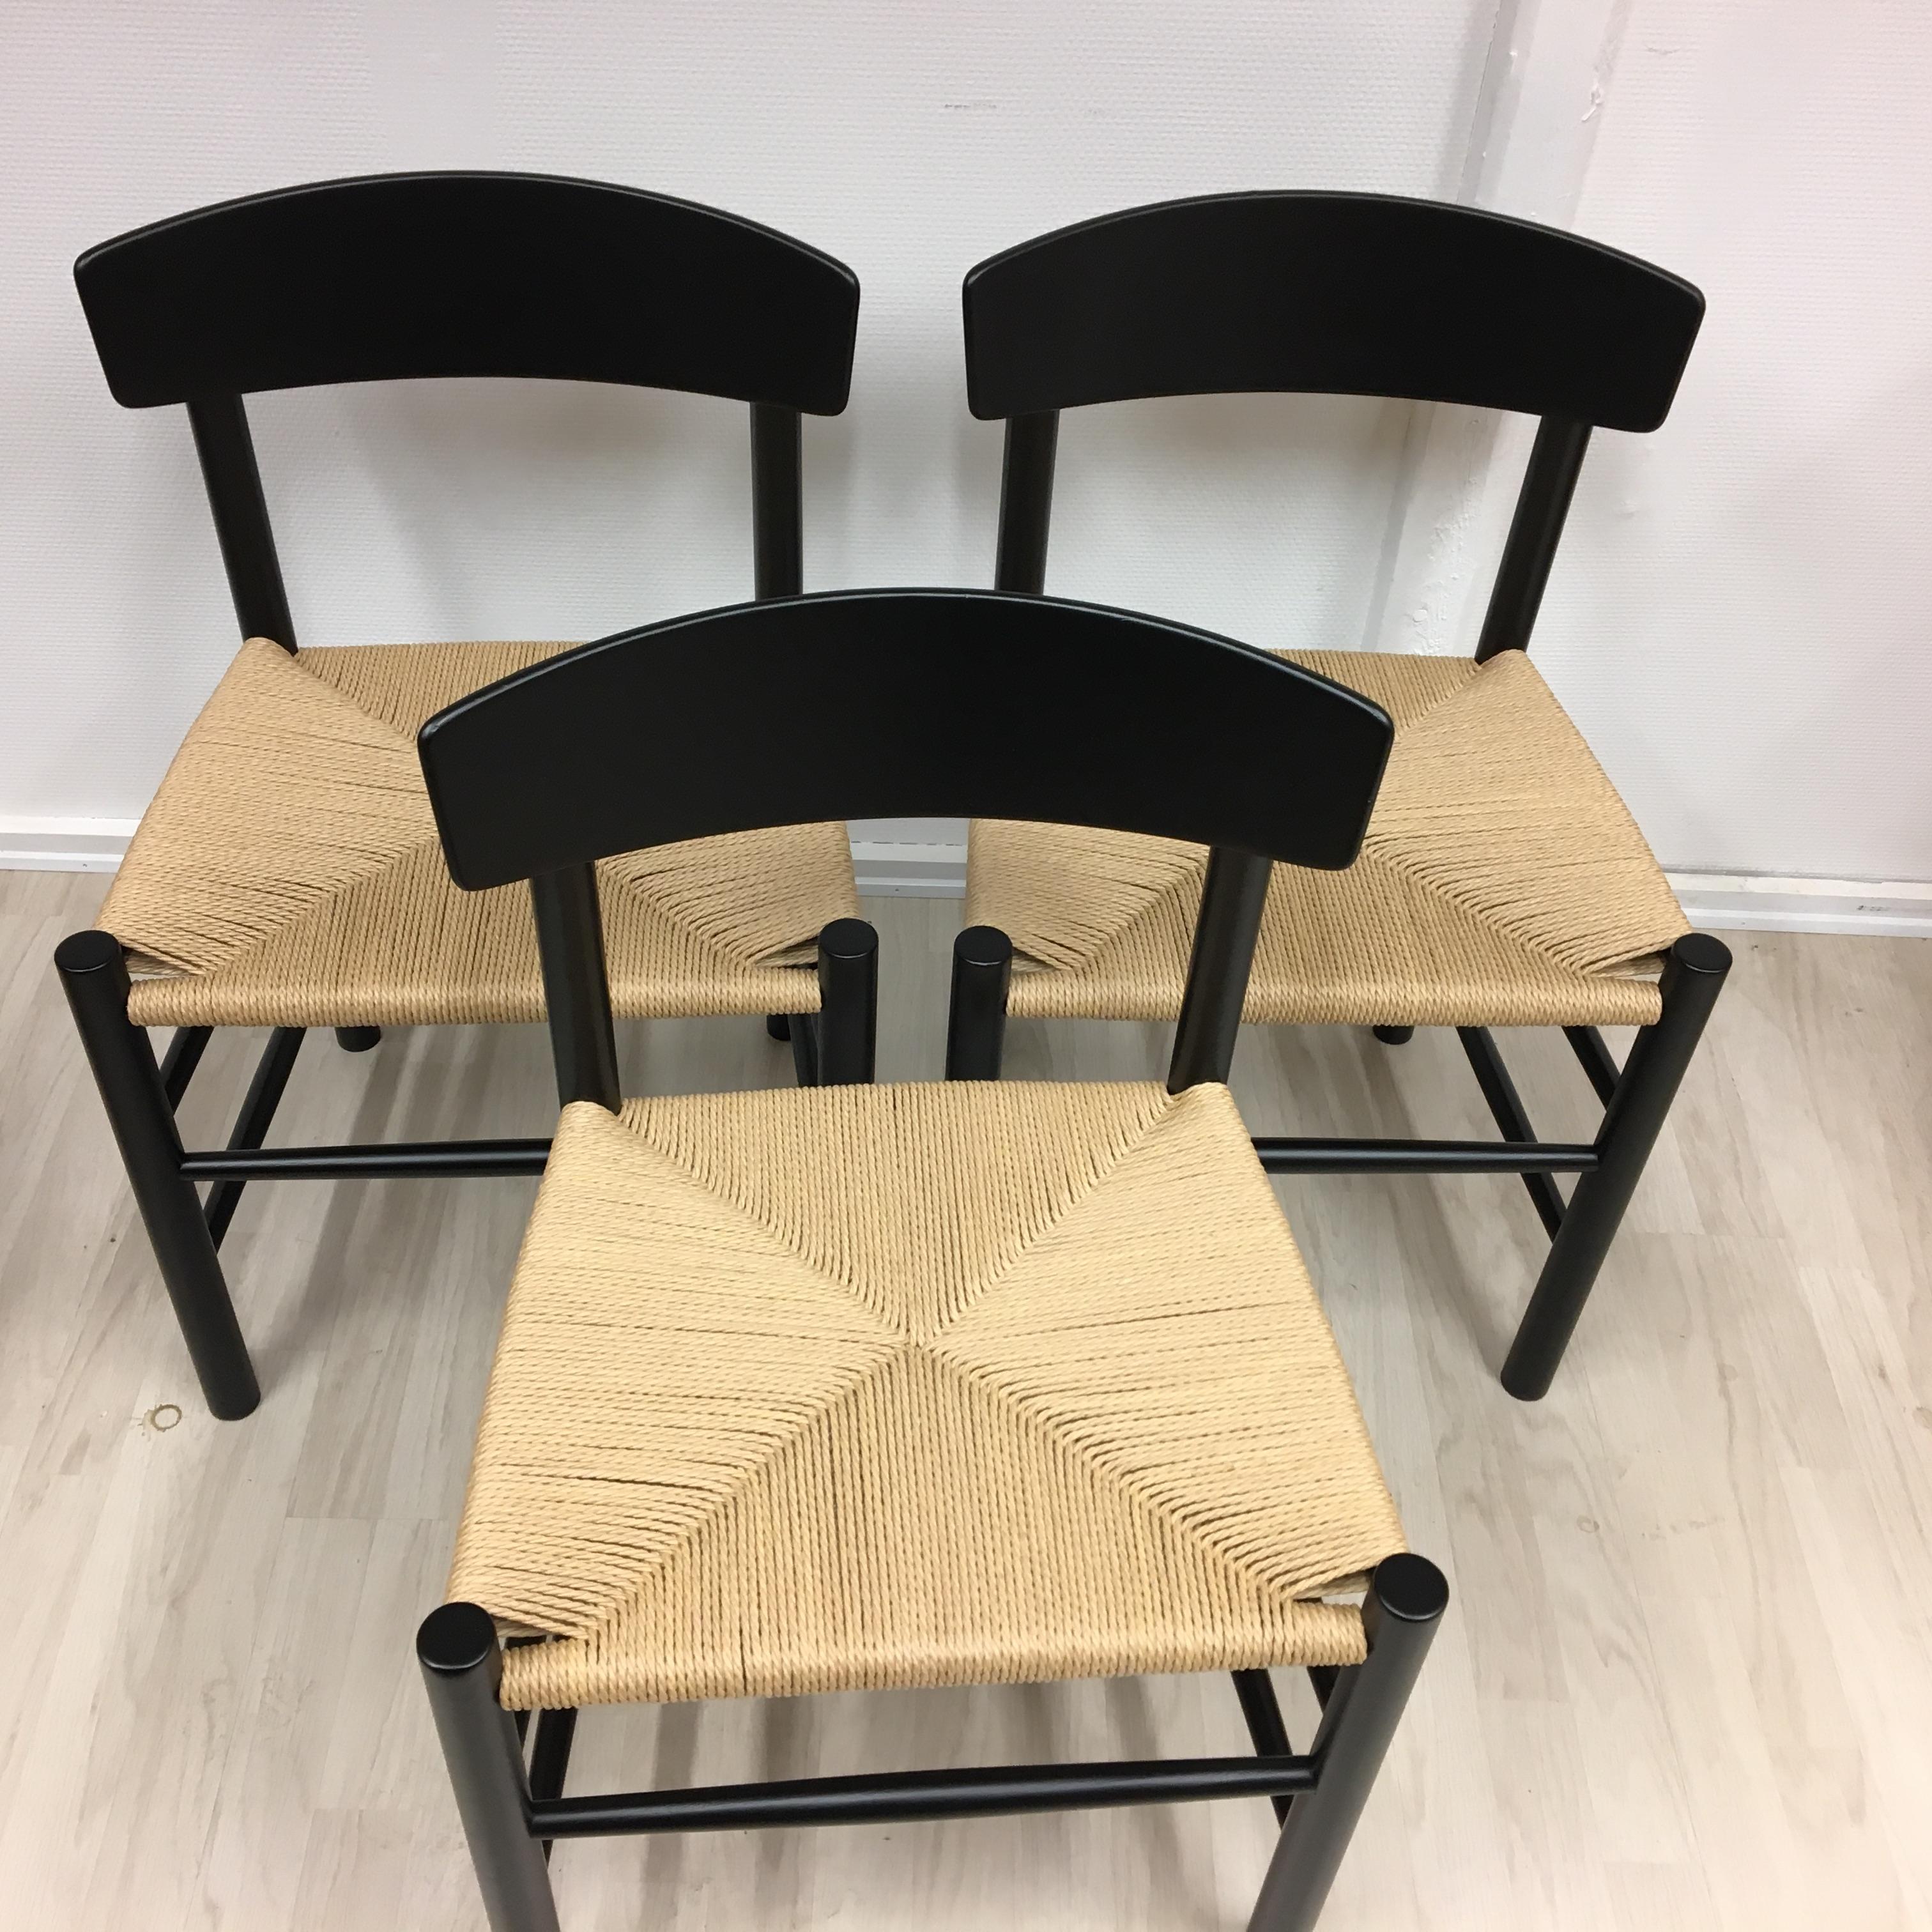 These 3 Folkestol by Børge Mogensen are freshly varnished and with new handwoven natural paper wicker. Stone has new furniture shoes and was made from Fredericia Furniture in 1983. This chair was designed for the FDB, the Danish Cooperative, in 1947.